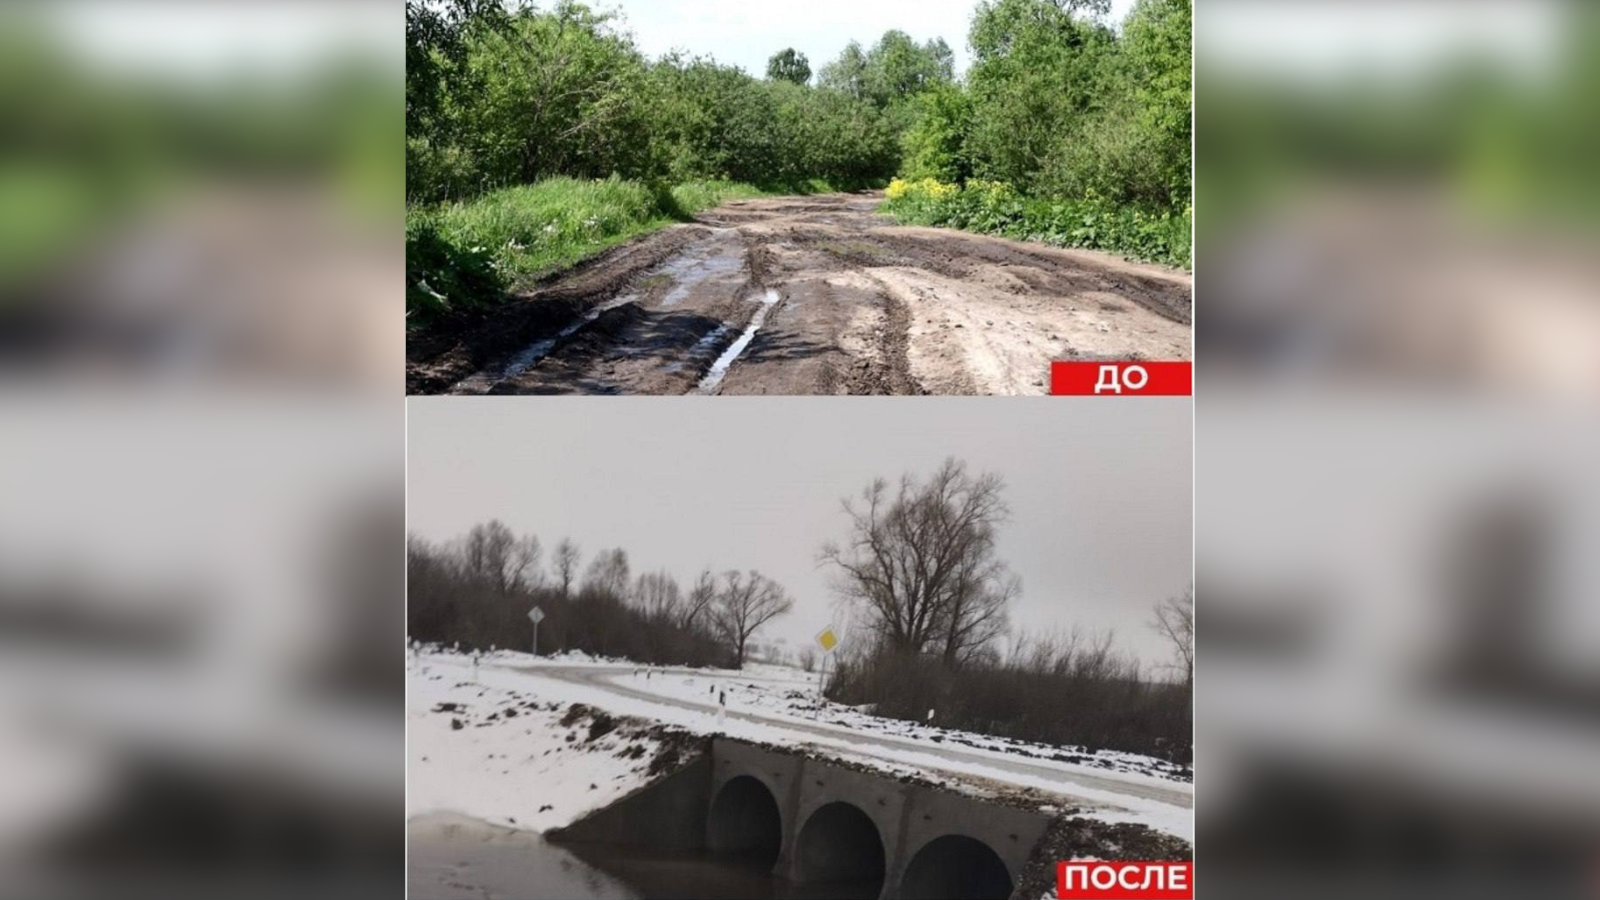 In Kuldym, they waited 20 years for the road to the cemetery to be repaired.